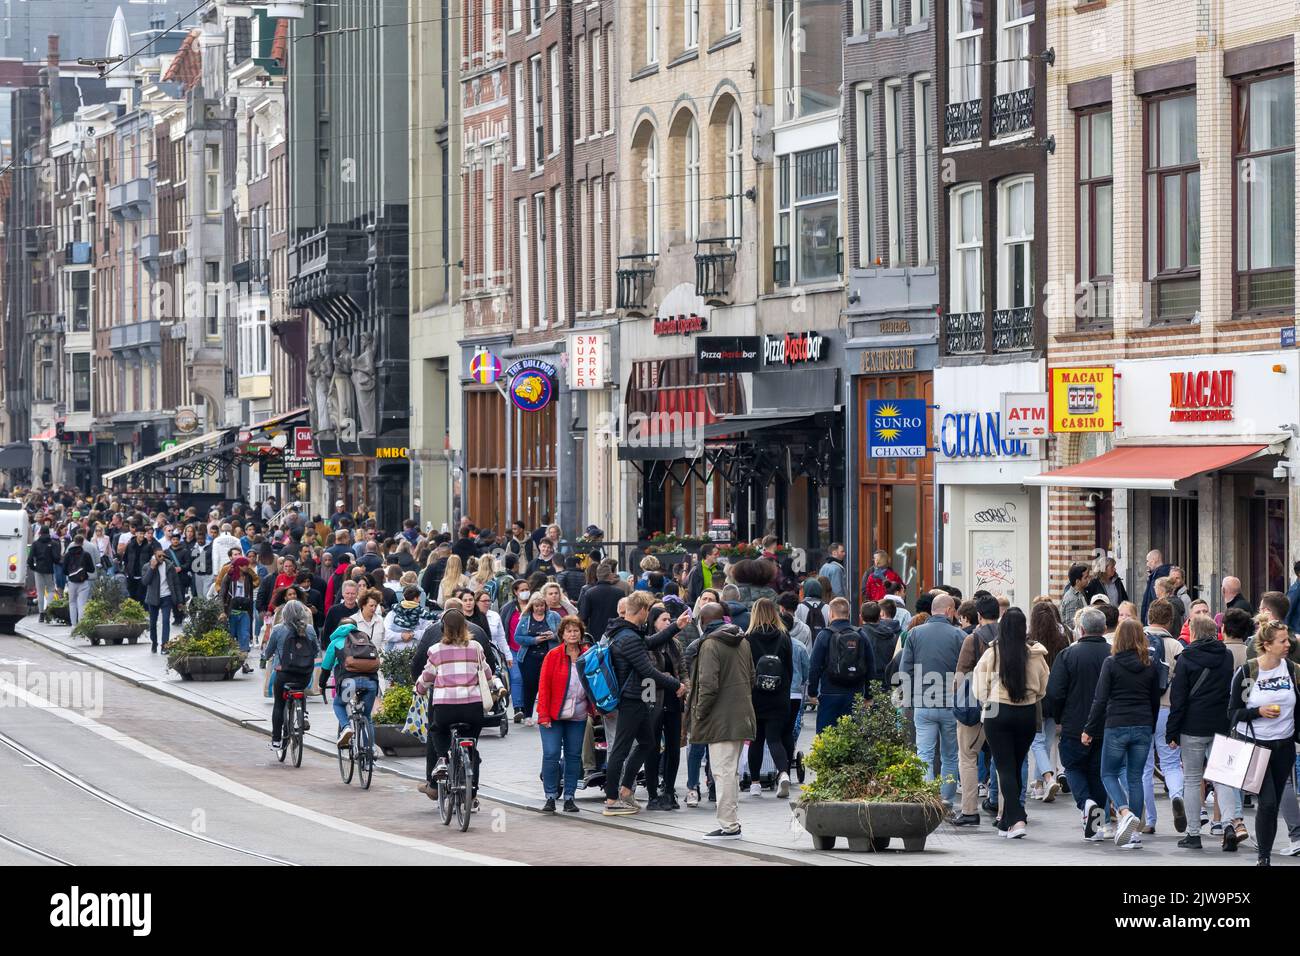 A general view of a busy street in Amsterdam, Holland. Stock Photo